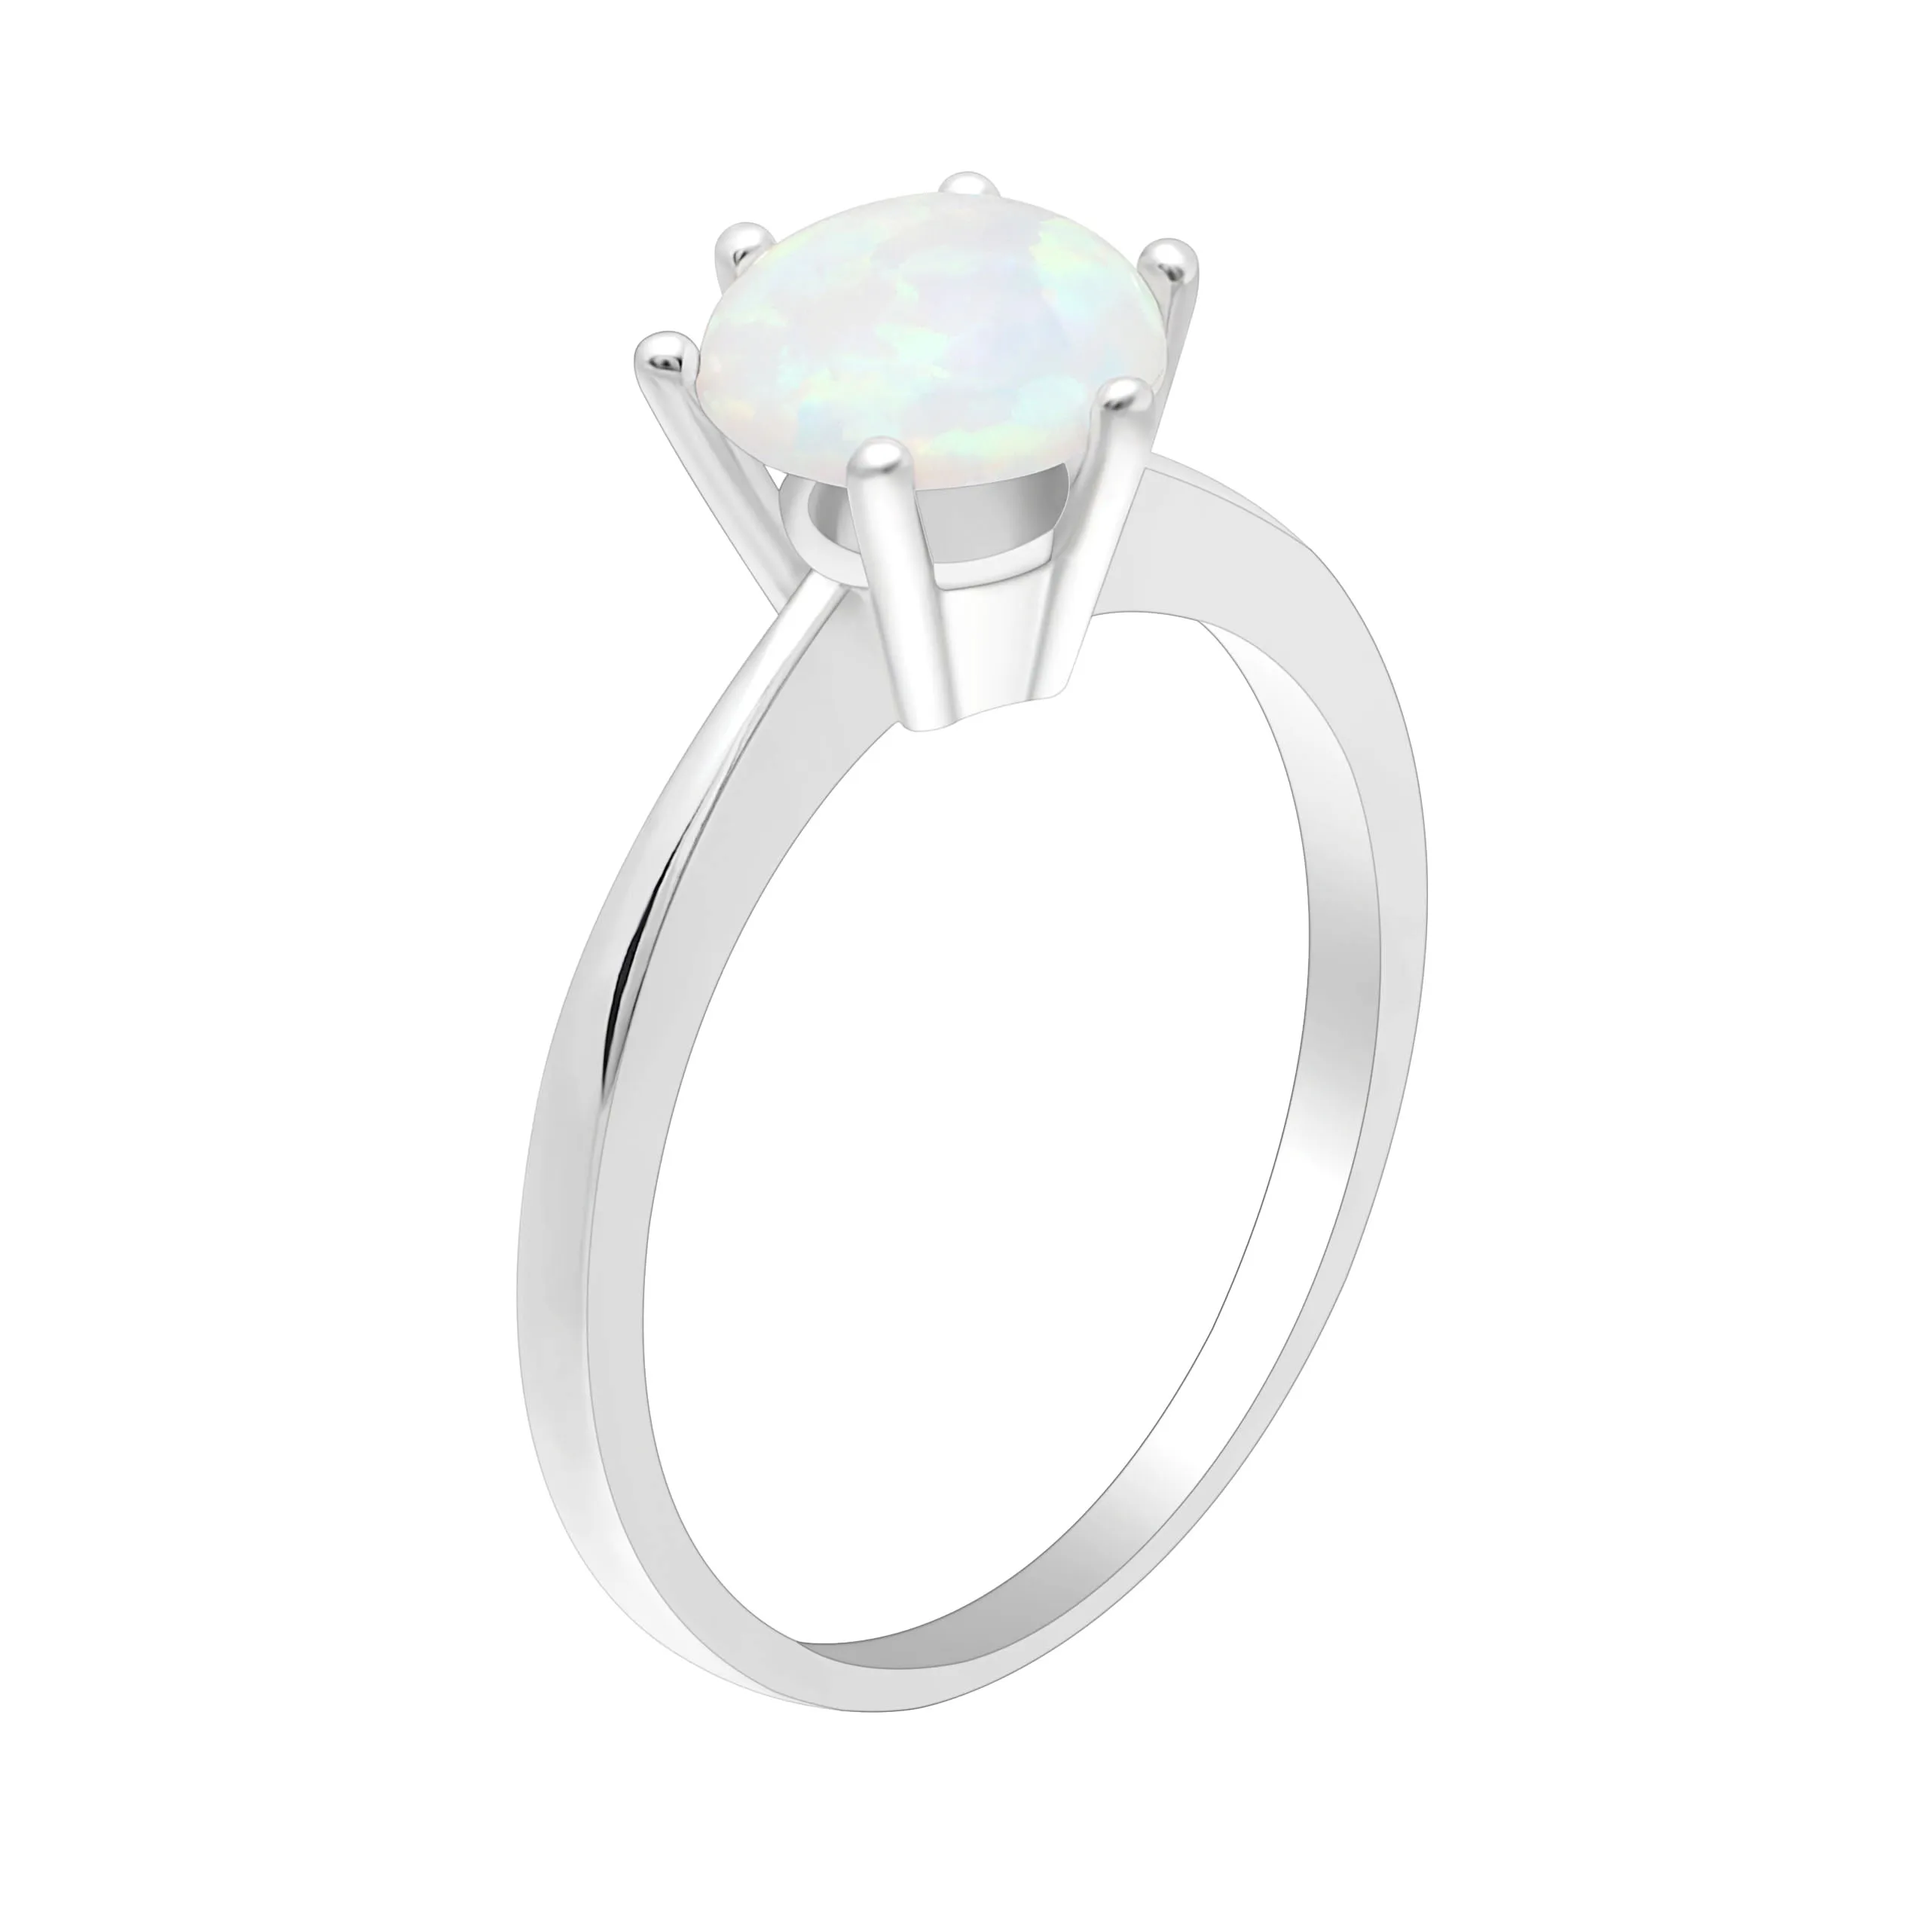 

X-Jue Elegant Silver Color promise Rings Simple White Fire Opal Jewelry Wedding Engagement Rings For Women Valentines Day Gifts